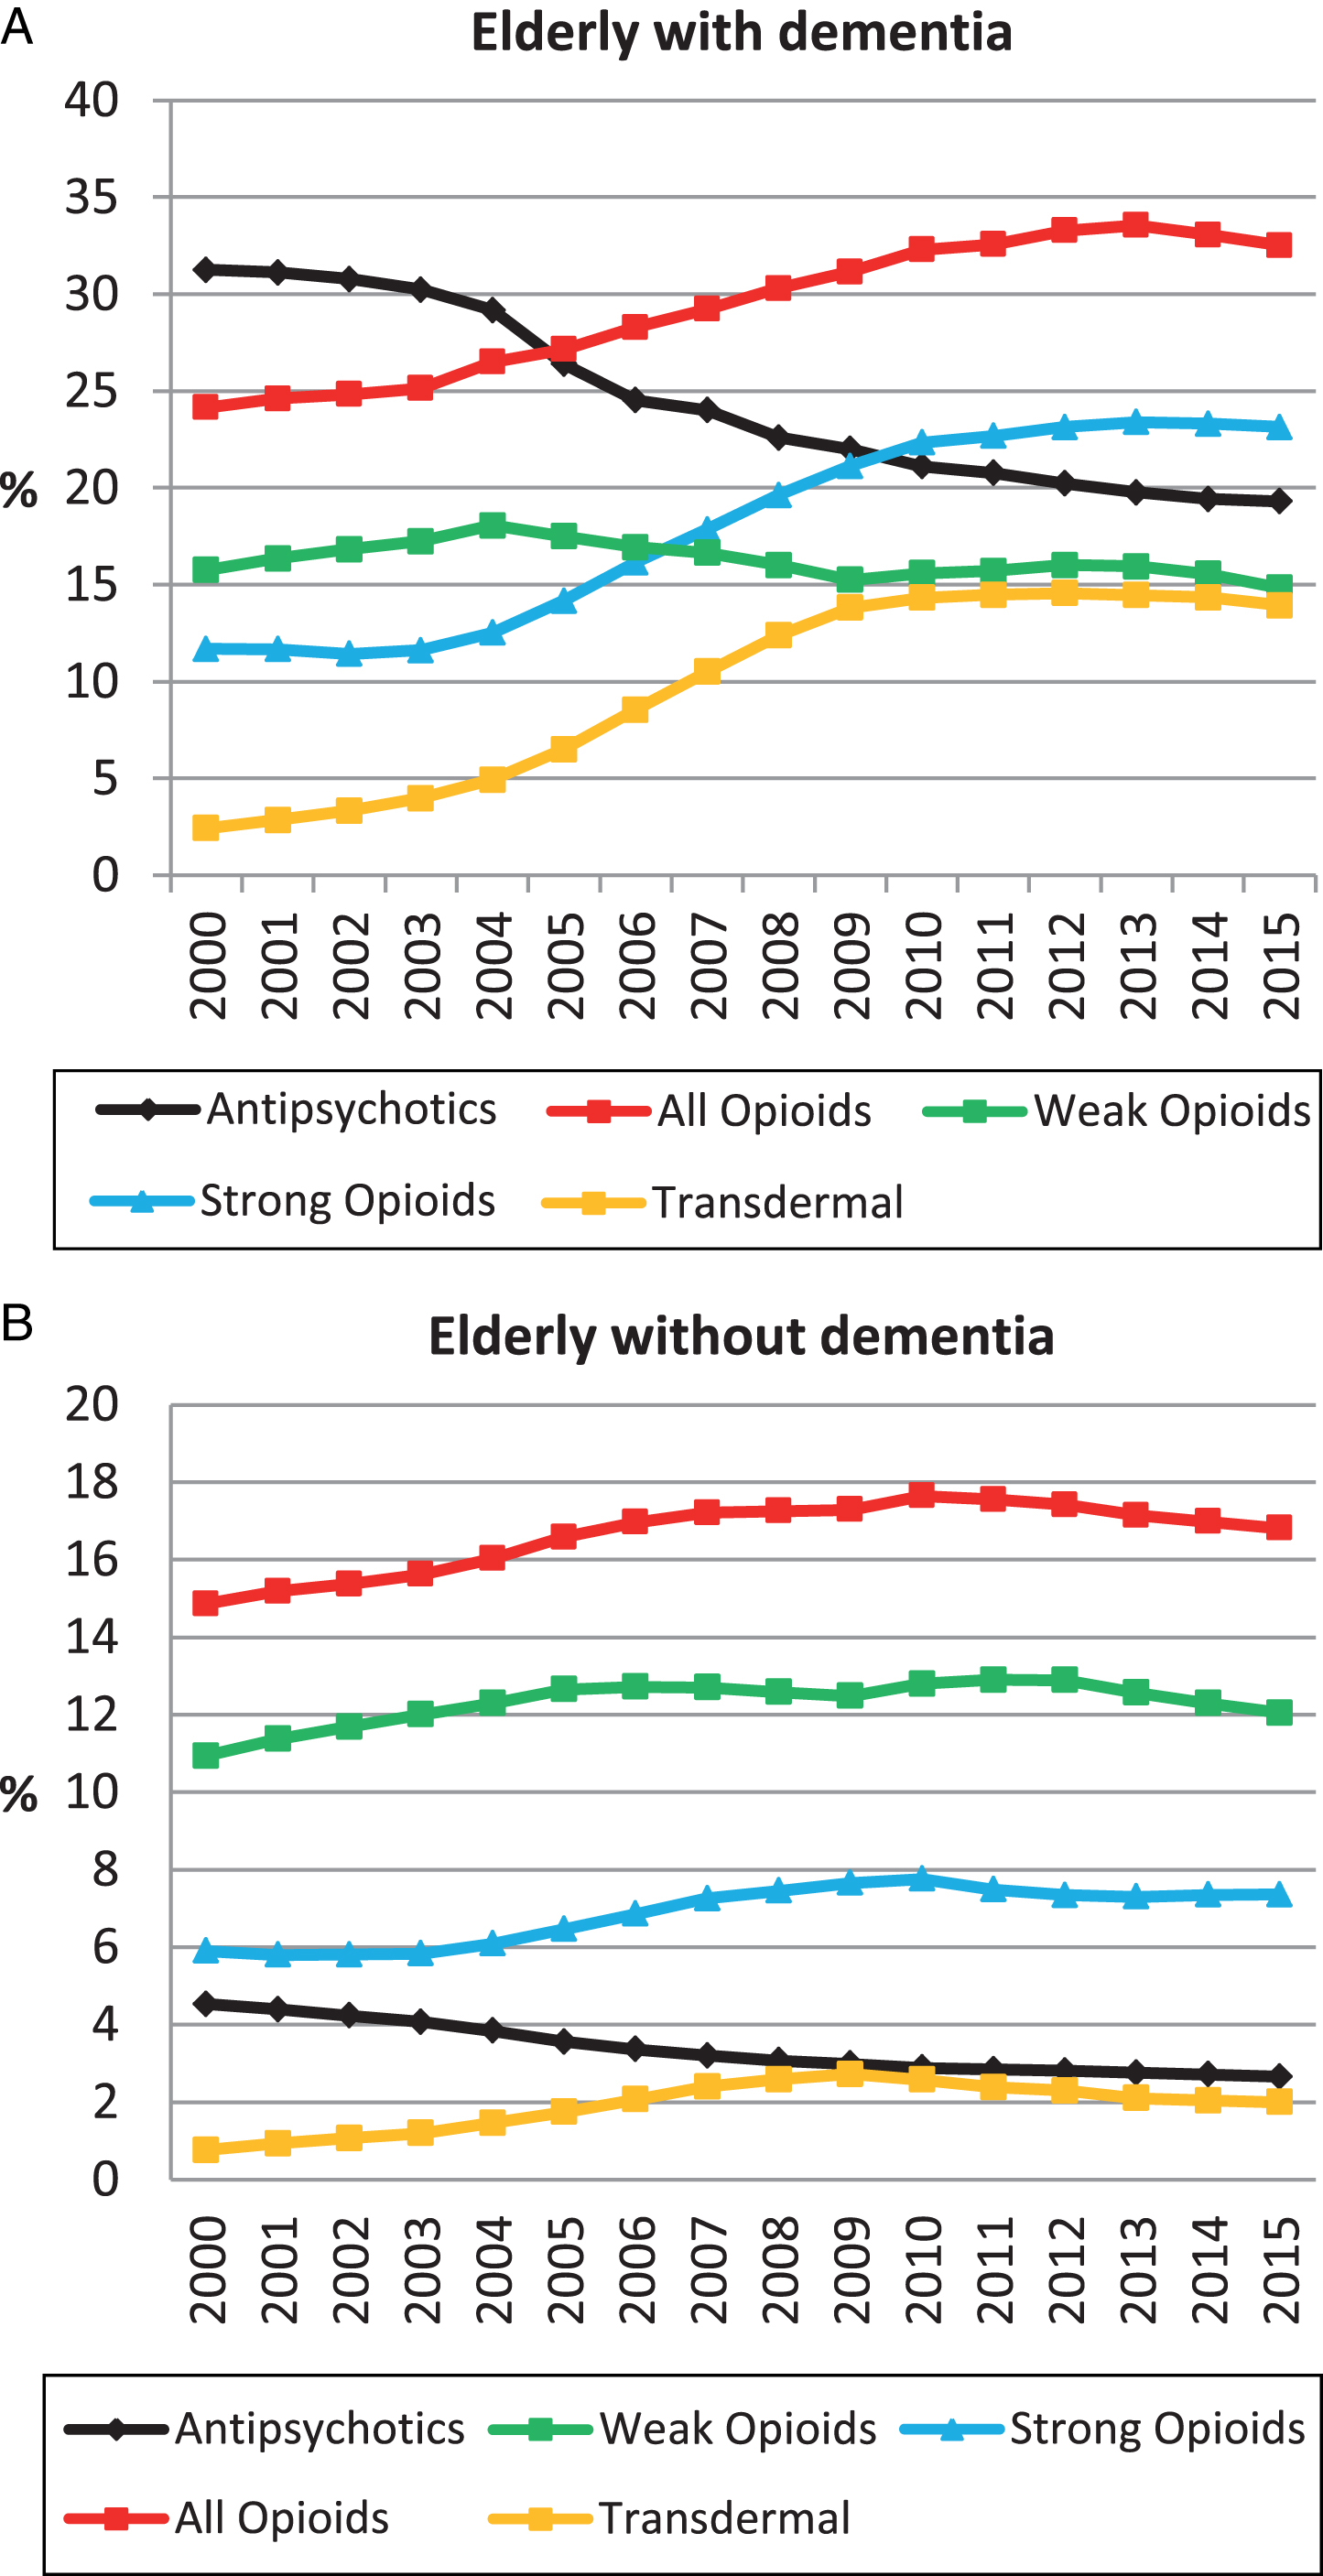 Prevalence of opioid and antipsychotic use from 2000 to 2015 in elderly with dementia (A) and elderly without dementia (B).